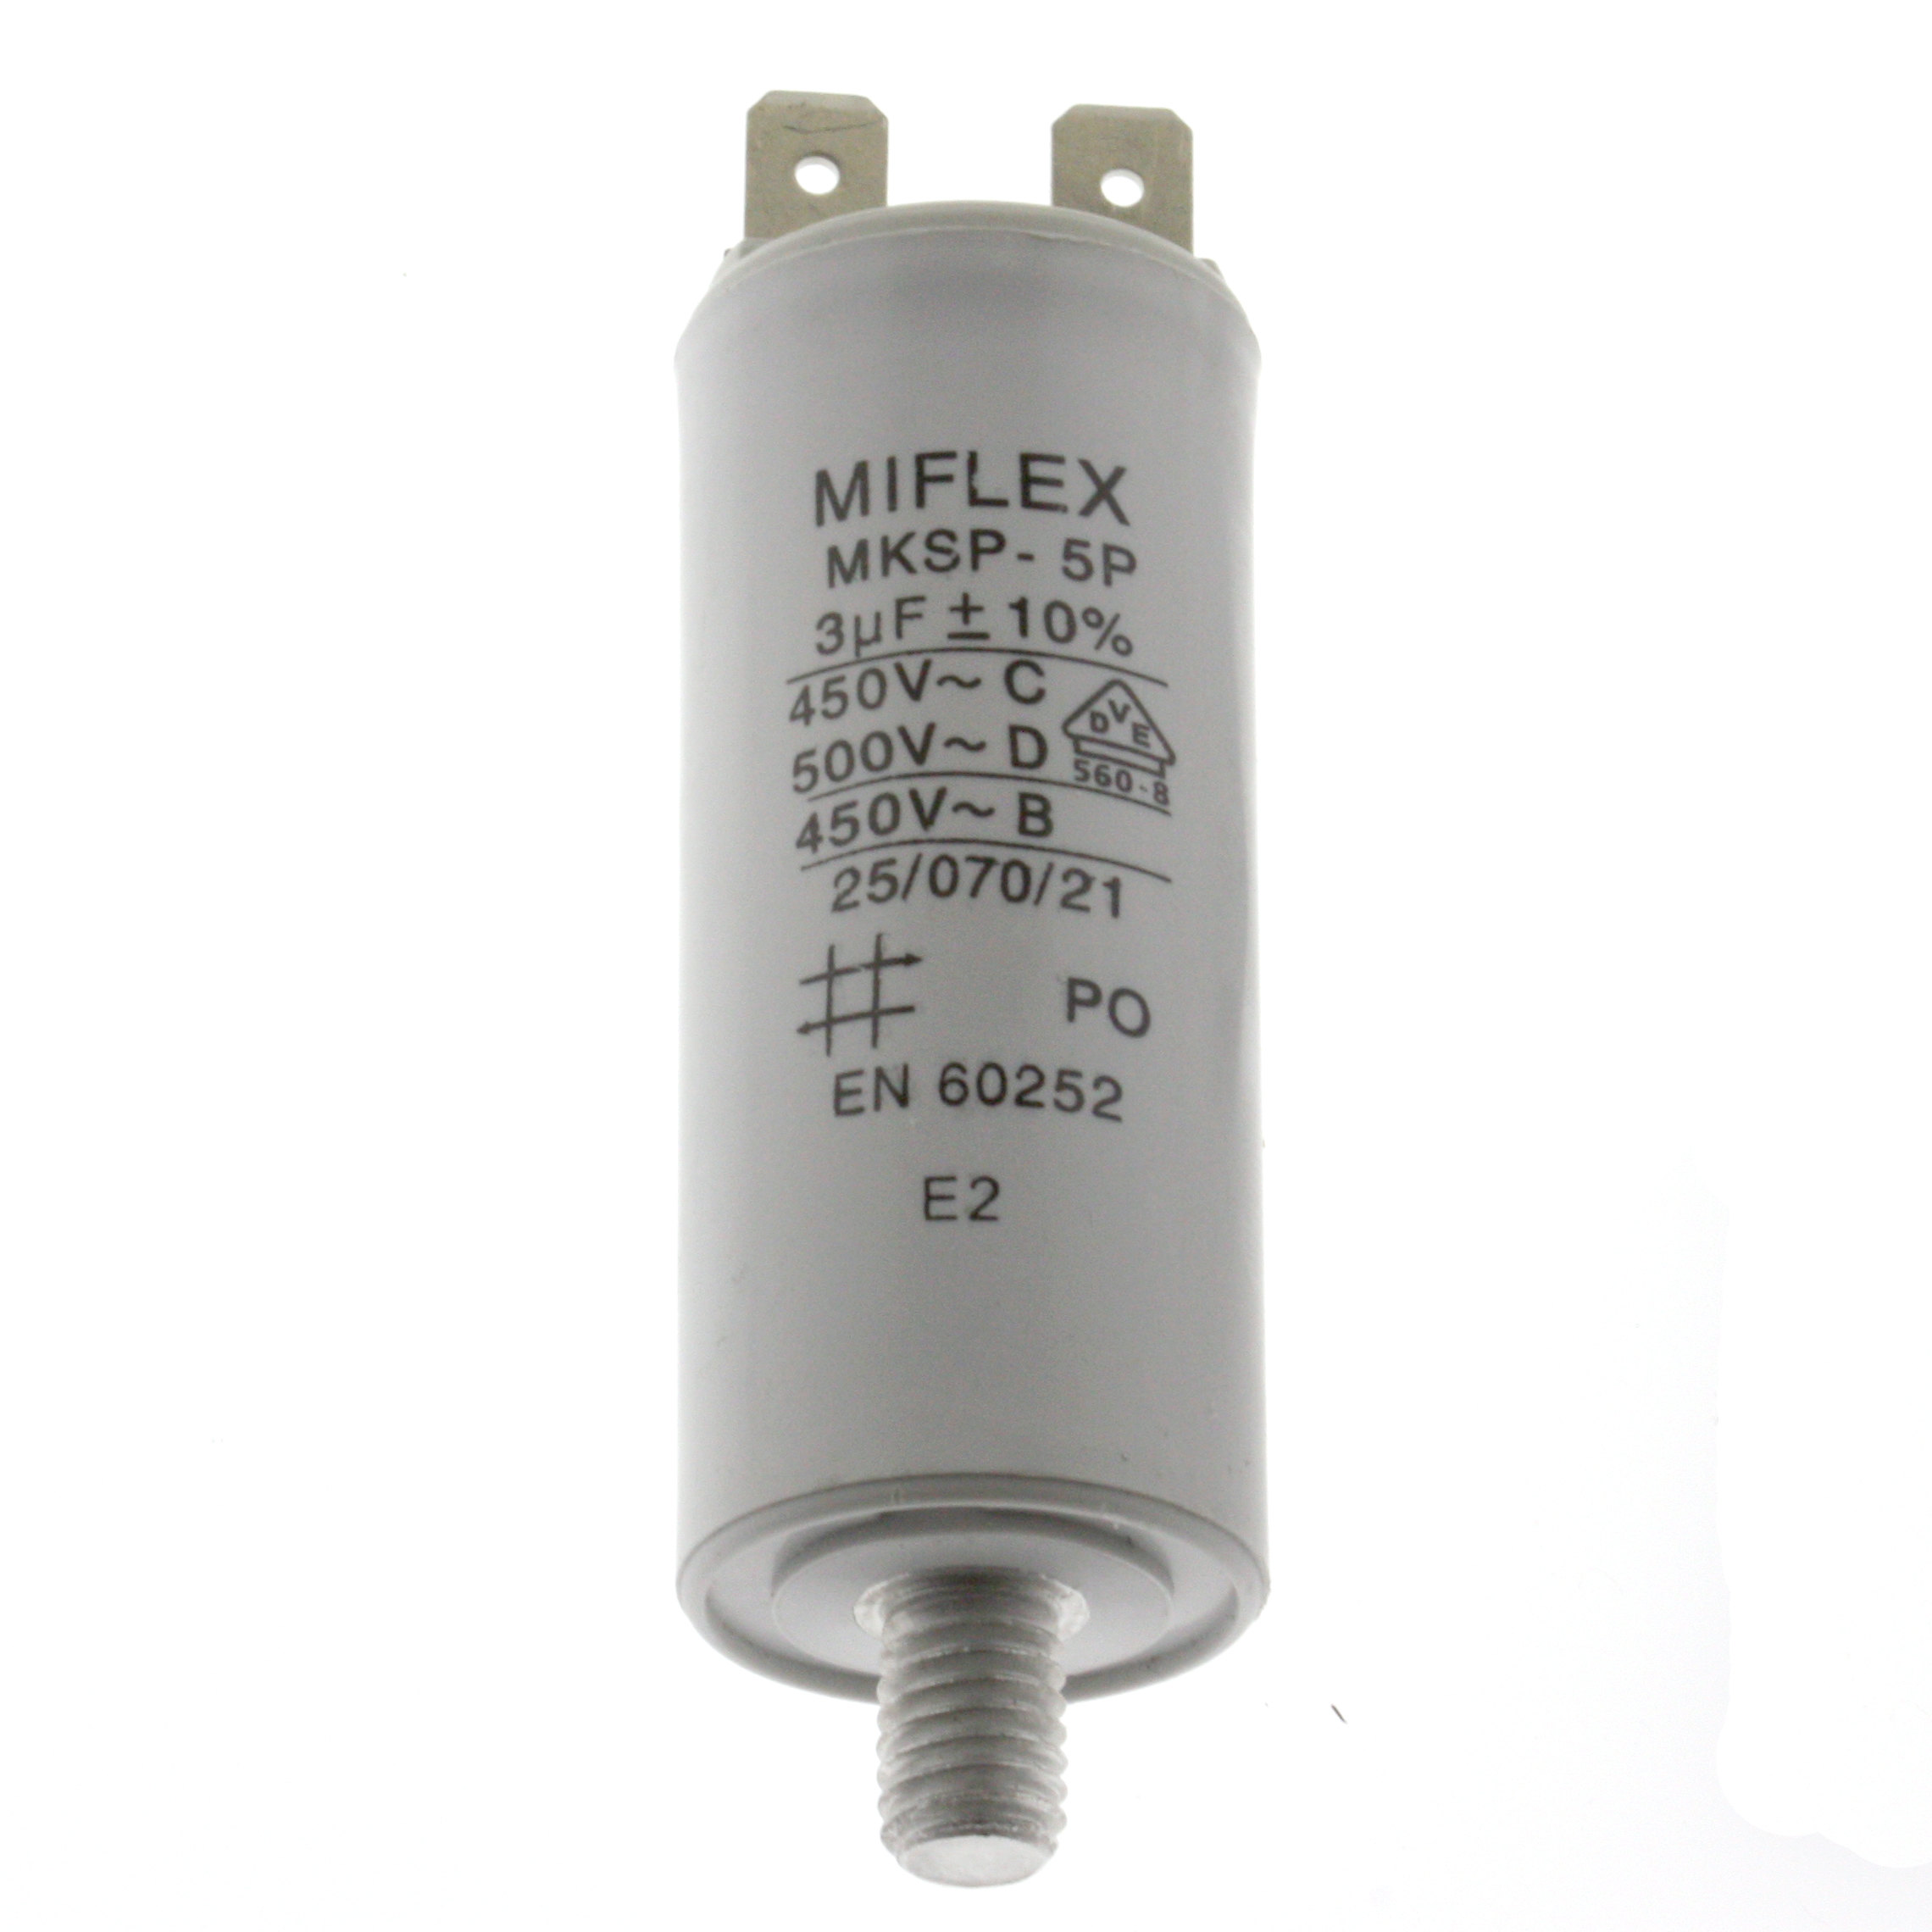 Motor Capacitor 3uF-450V, 25x58mm, flat connection